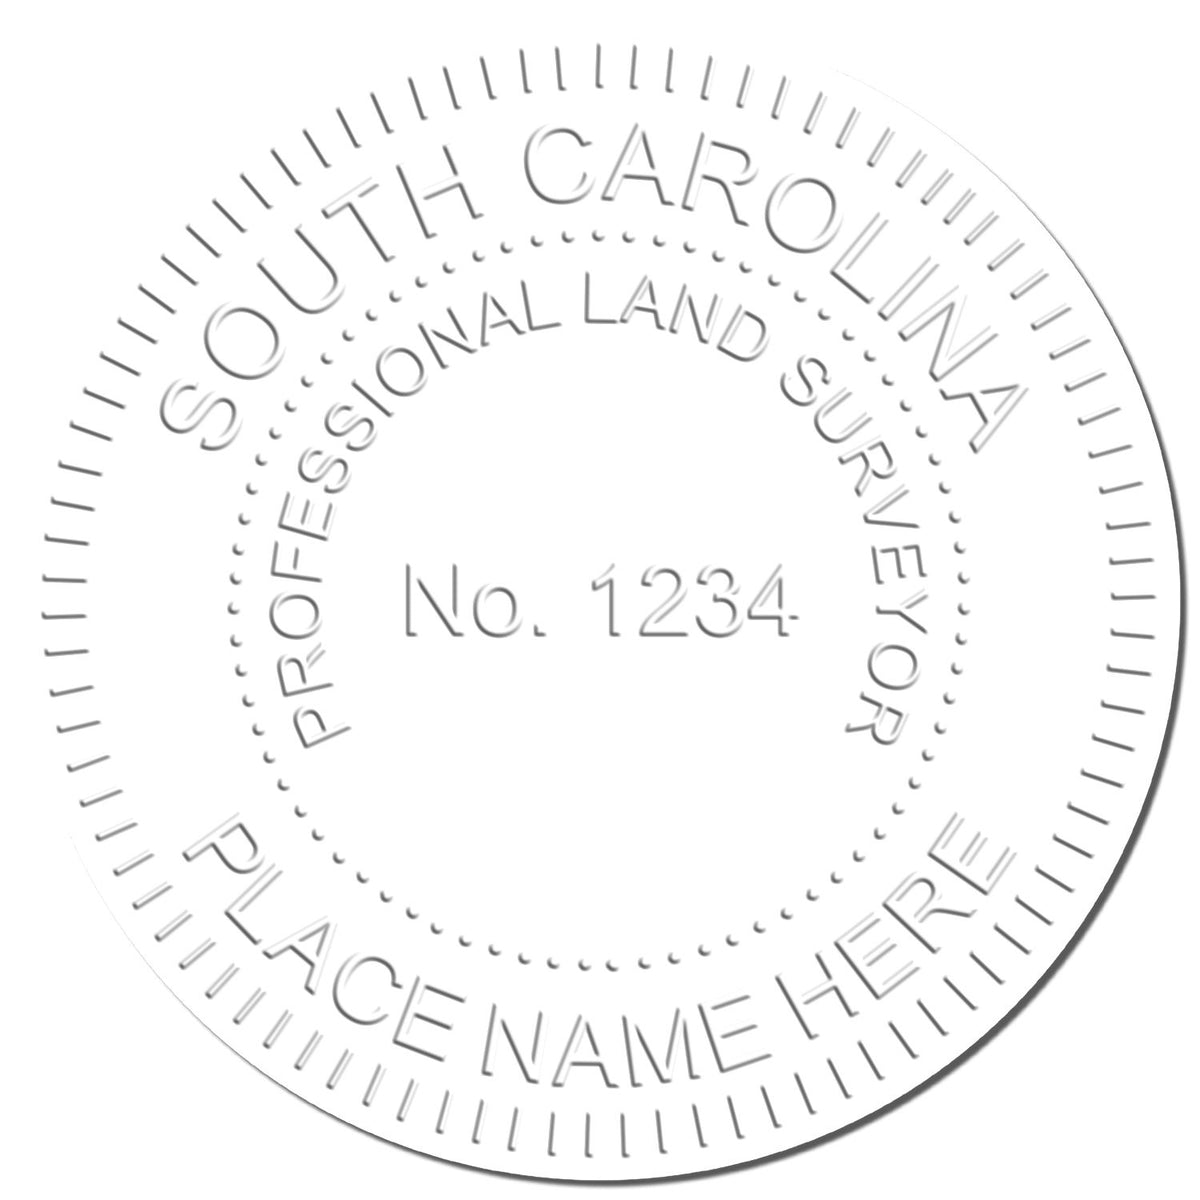 This paper is stamped with a sample imprint of the Hybrid South Carolina Land Surveyor Seal, signifying its quality and reliability.